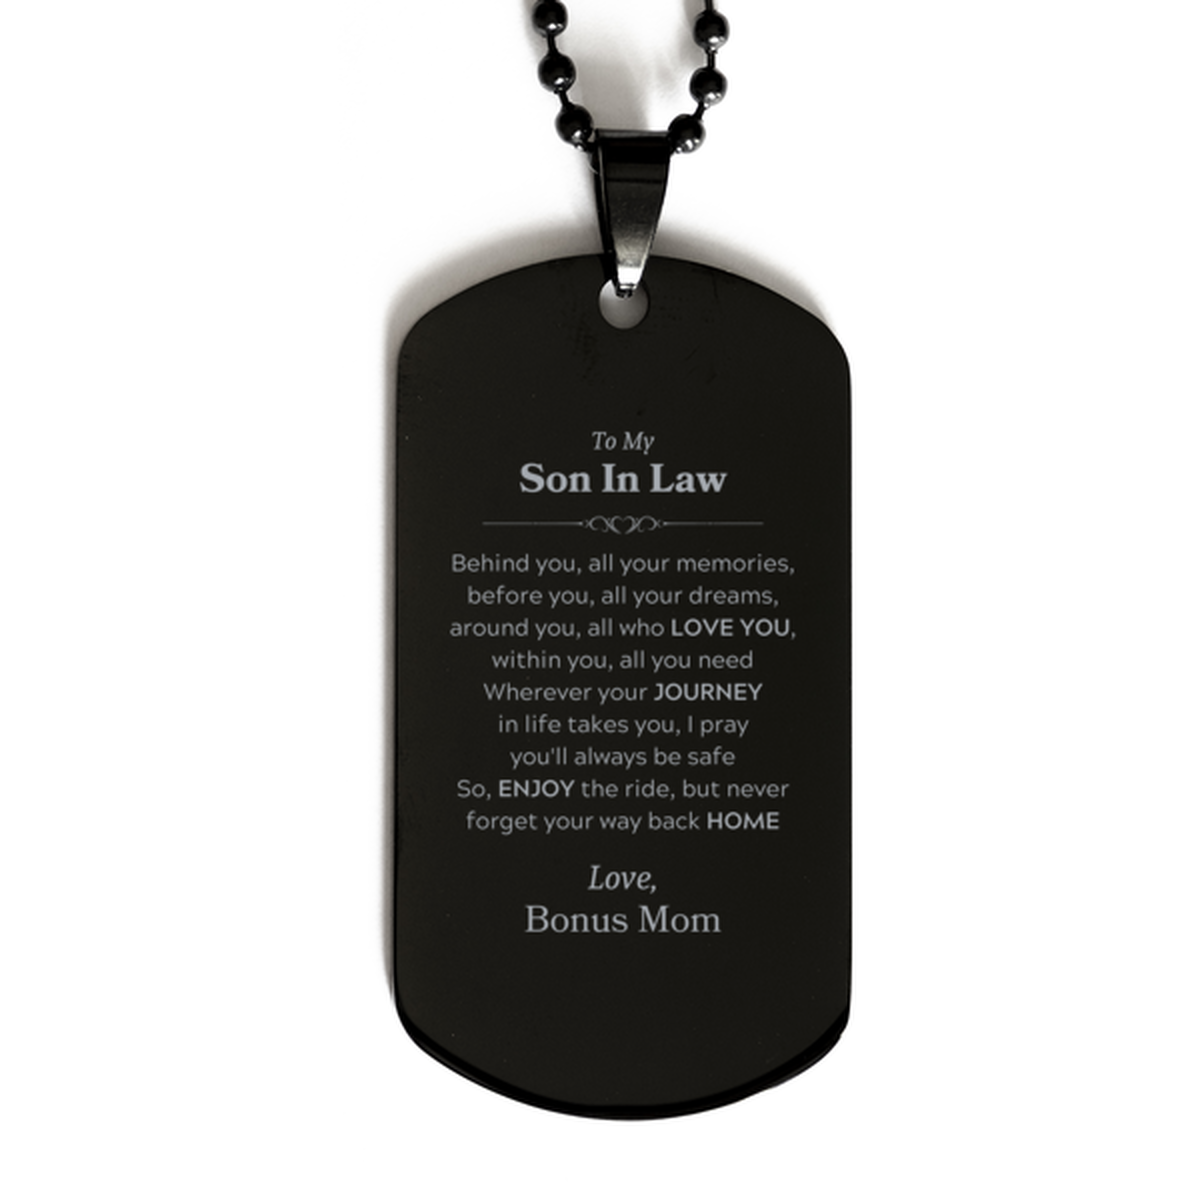 To My Son In Law Graduation Gifts from Bonus Mom, Son In Law Black Dog Tag Christmas Birthday Gifts for Son In Law Behind you, all your memories, before you, all your dreams. Love, Bonus Mom